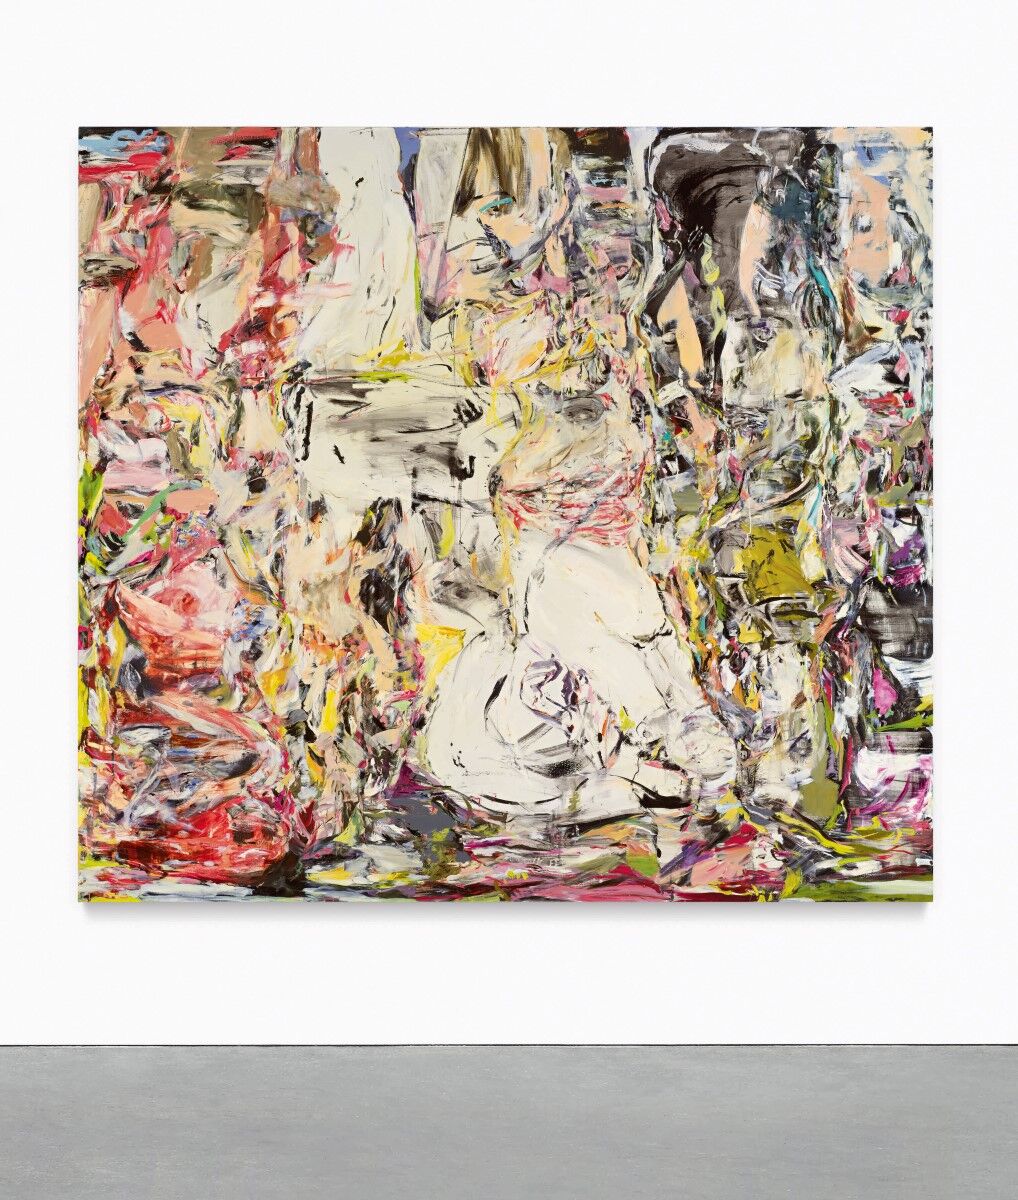 Cecily Brown, Suddenly Last Summer, 1999. Courtesy of Sotheby’s